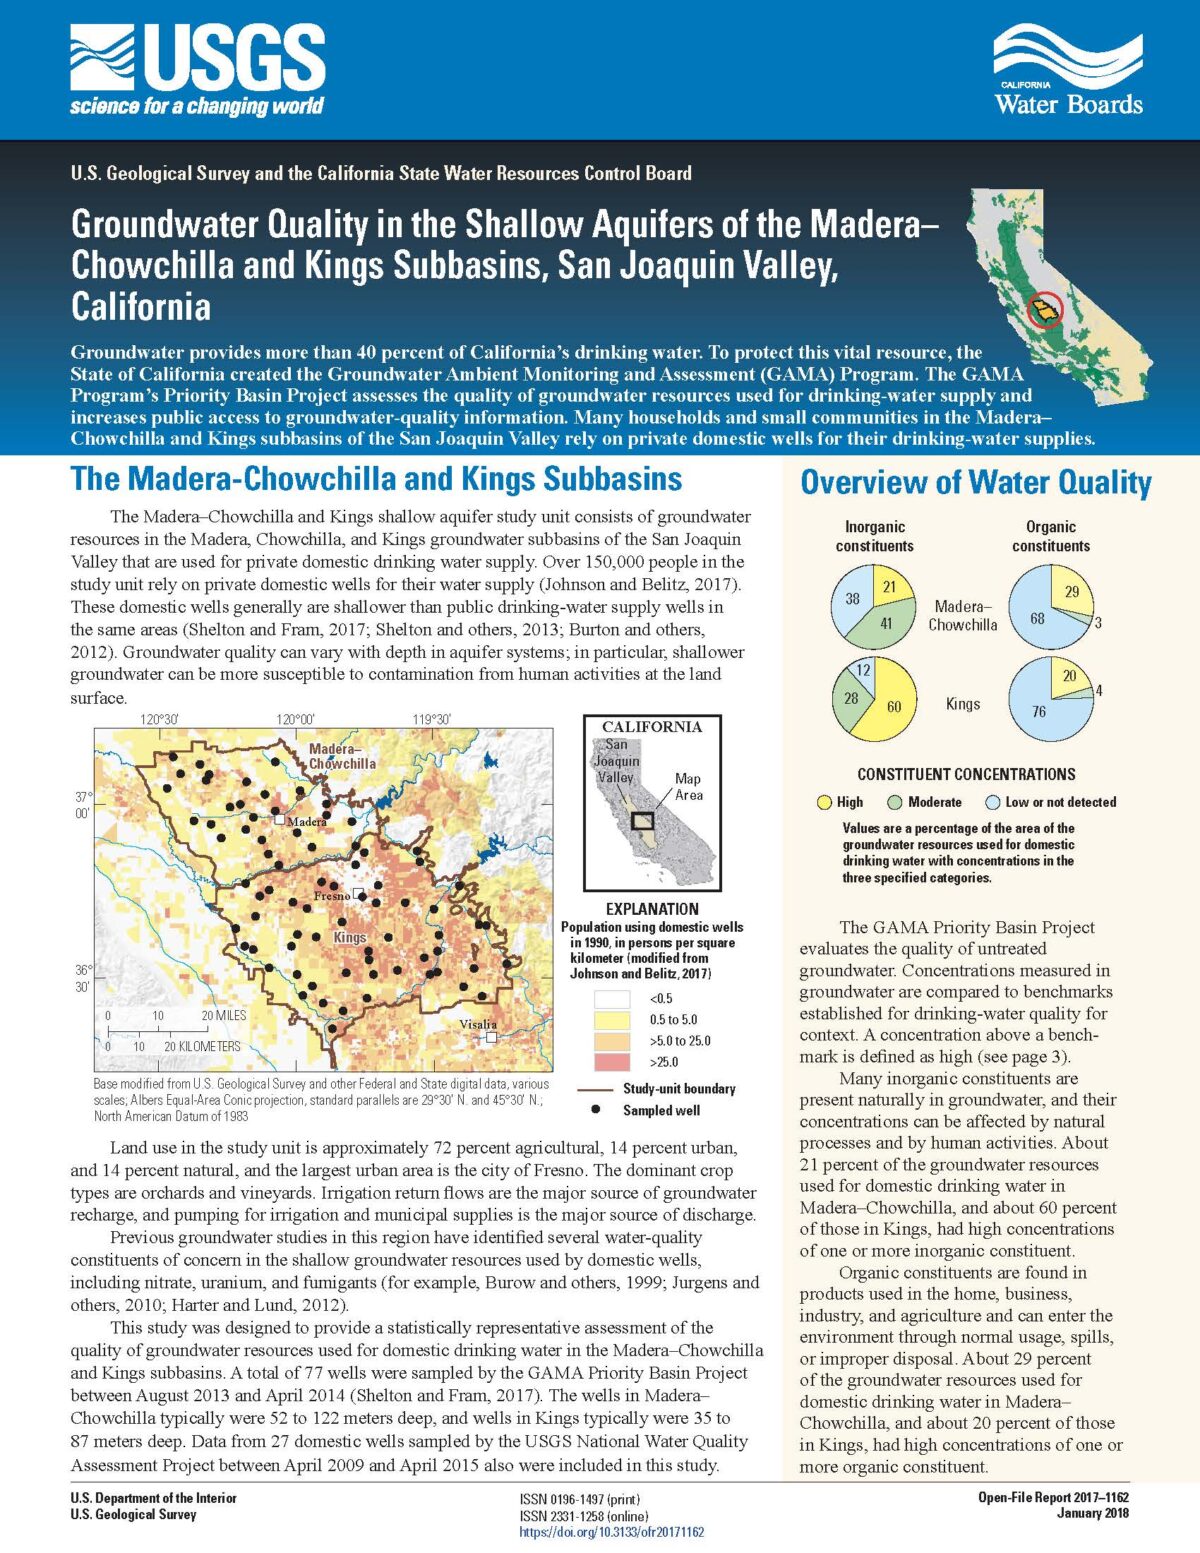 Groundwater Quality in the Shallow Aquifers of the Madera– Chowchilla and Kings Subbasins, San Joaquin Valley, California